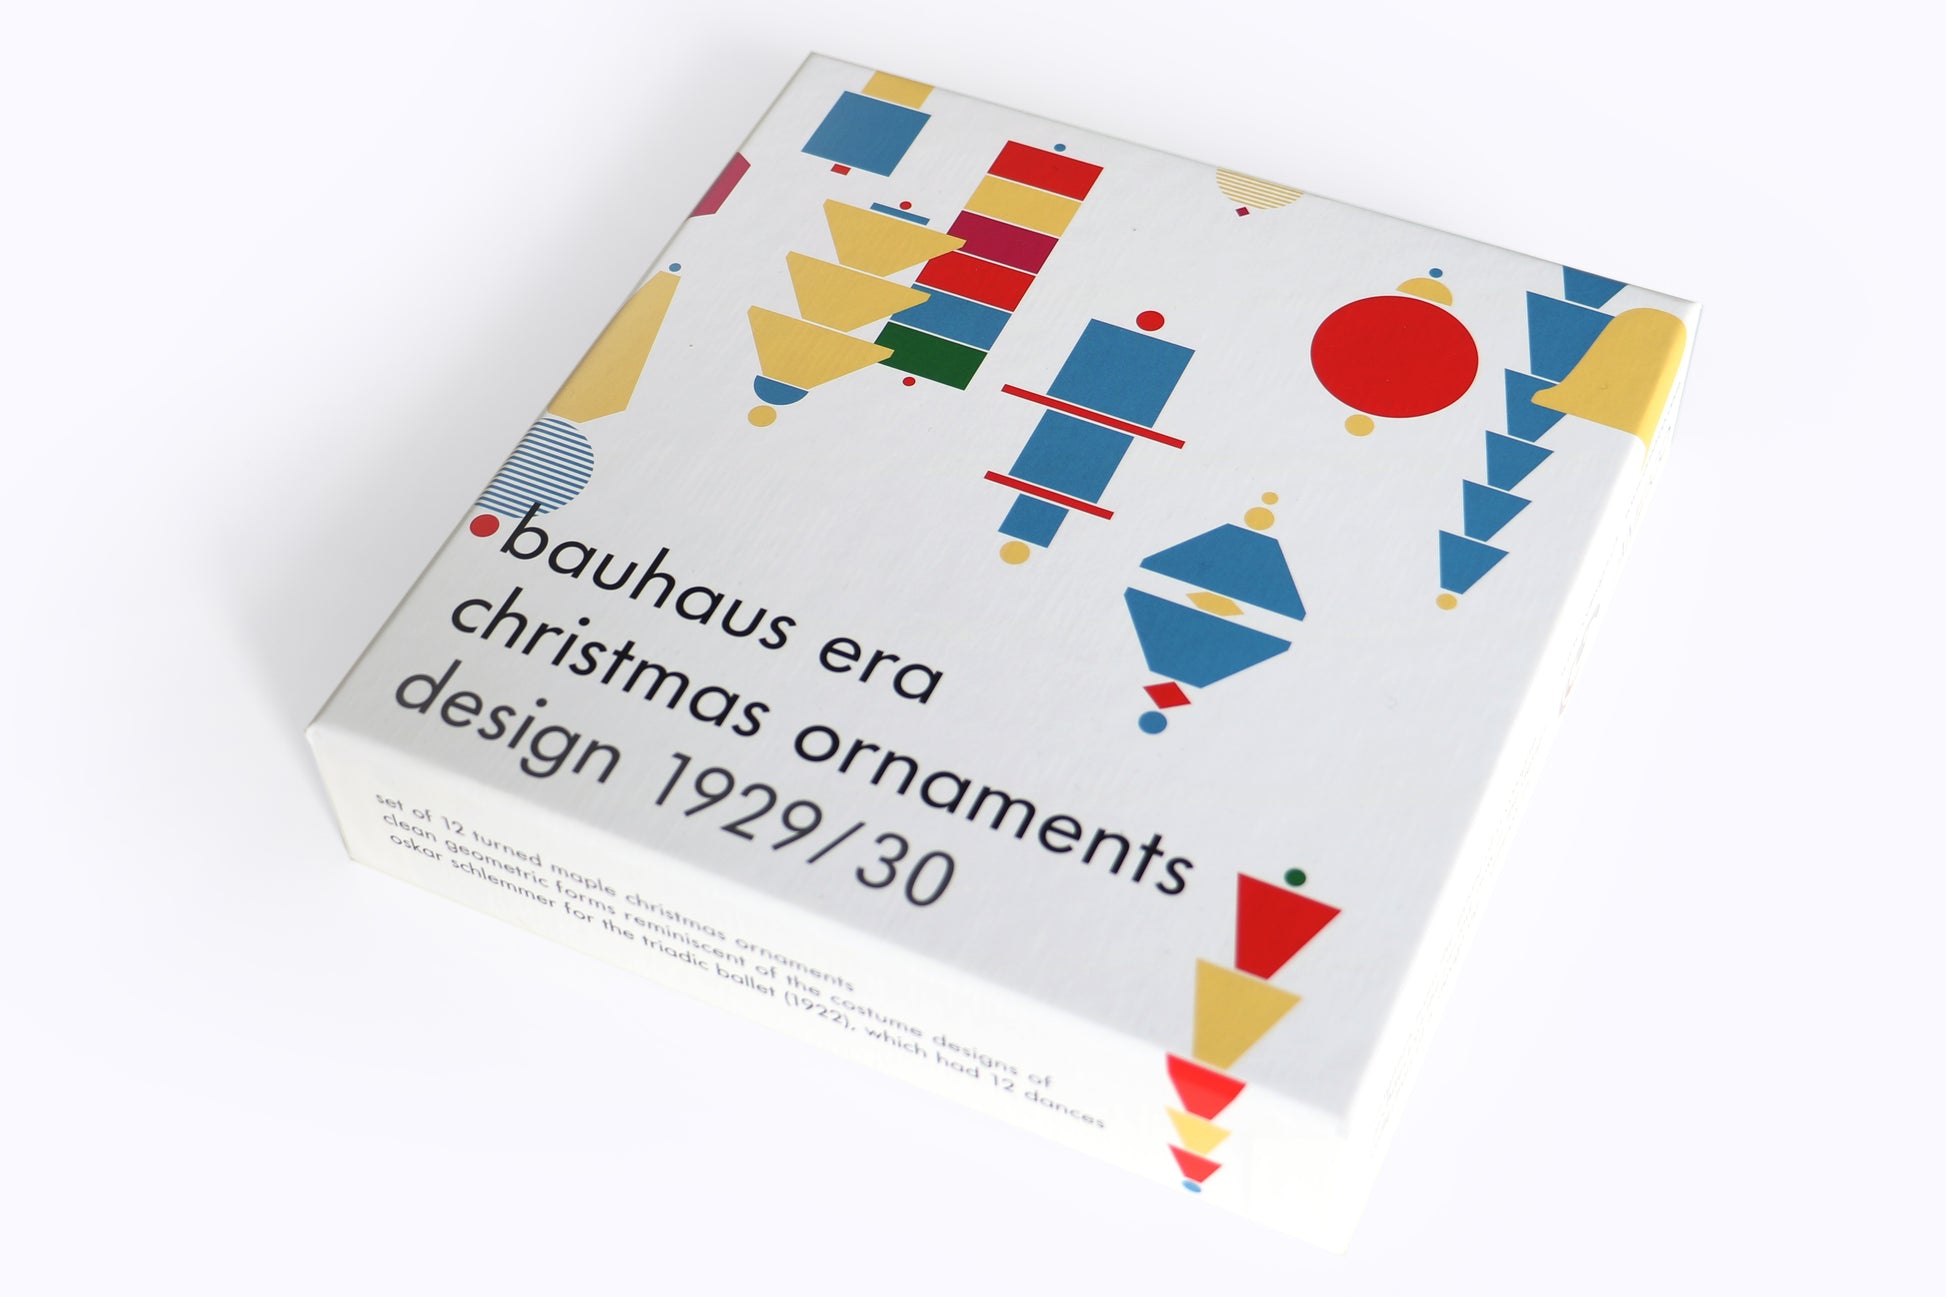 licensed re-edition of Bauhaus christmas ornaments design 1929/30